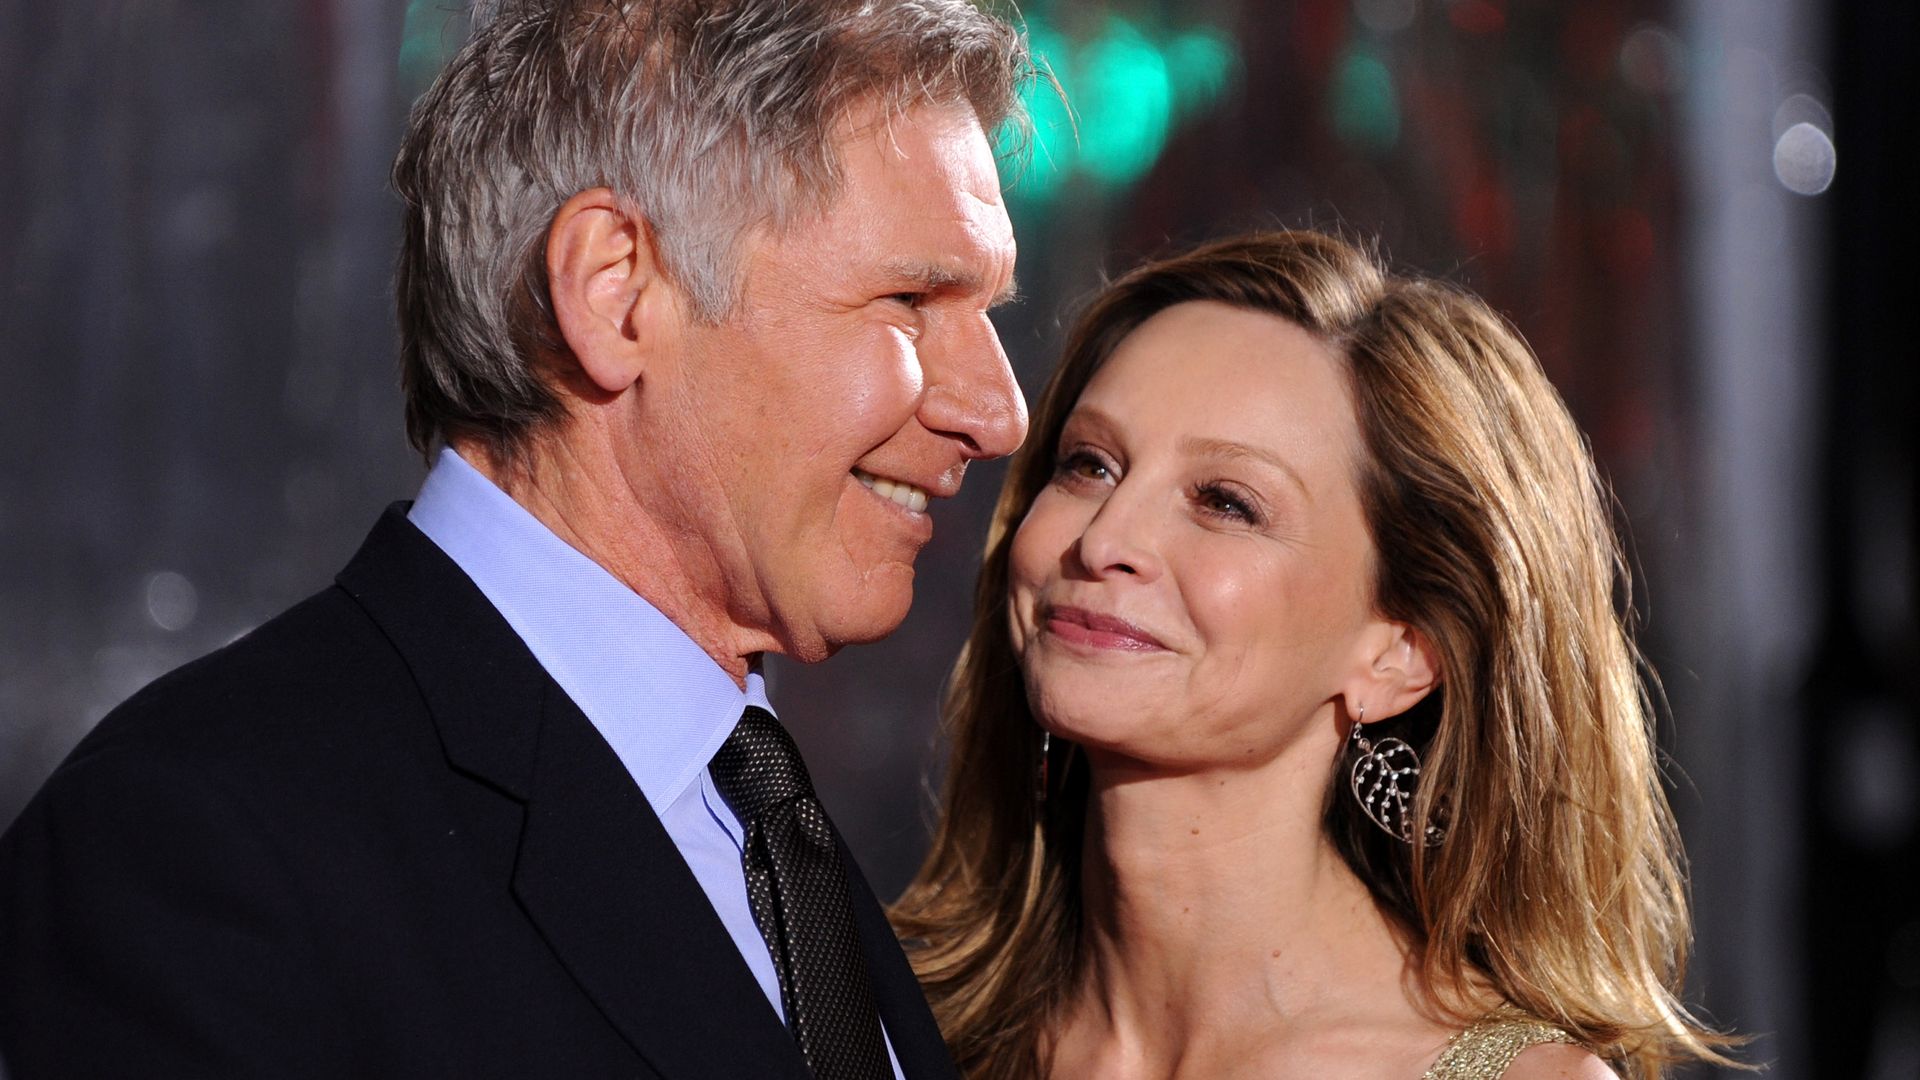 Actor Harrison Ford and Calista Flockhart, actress arrives at the premiere of CBS Films' "Extraordinary Measures" held at the Grauman's Chinese Theatre on January 19, 2010 in Hollywood, California.  (Photo by Frazer Harrison/Getty Images)